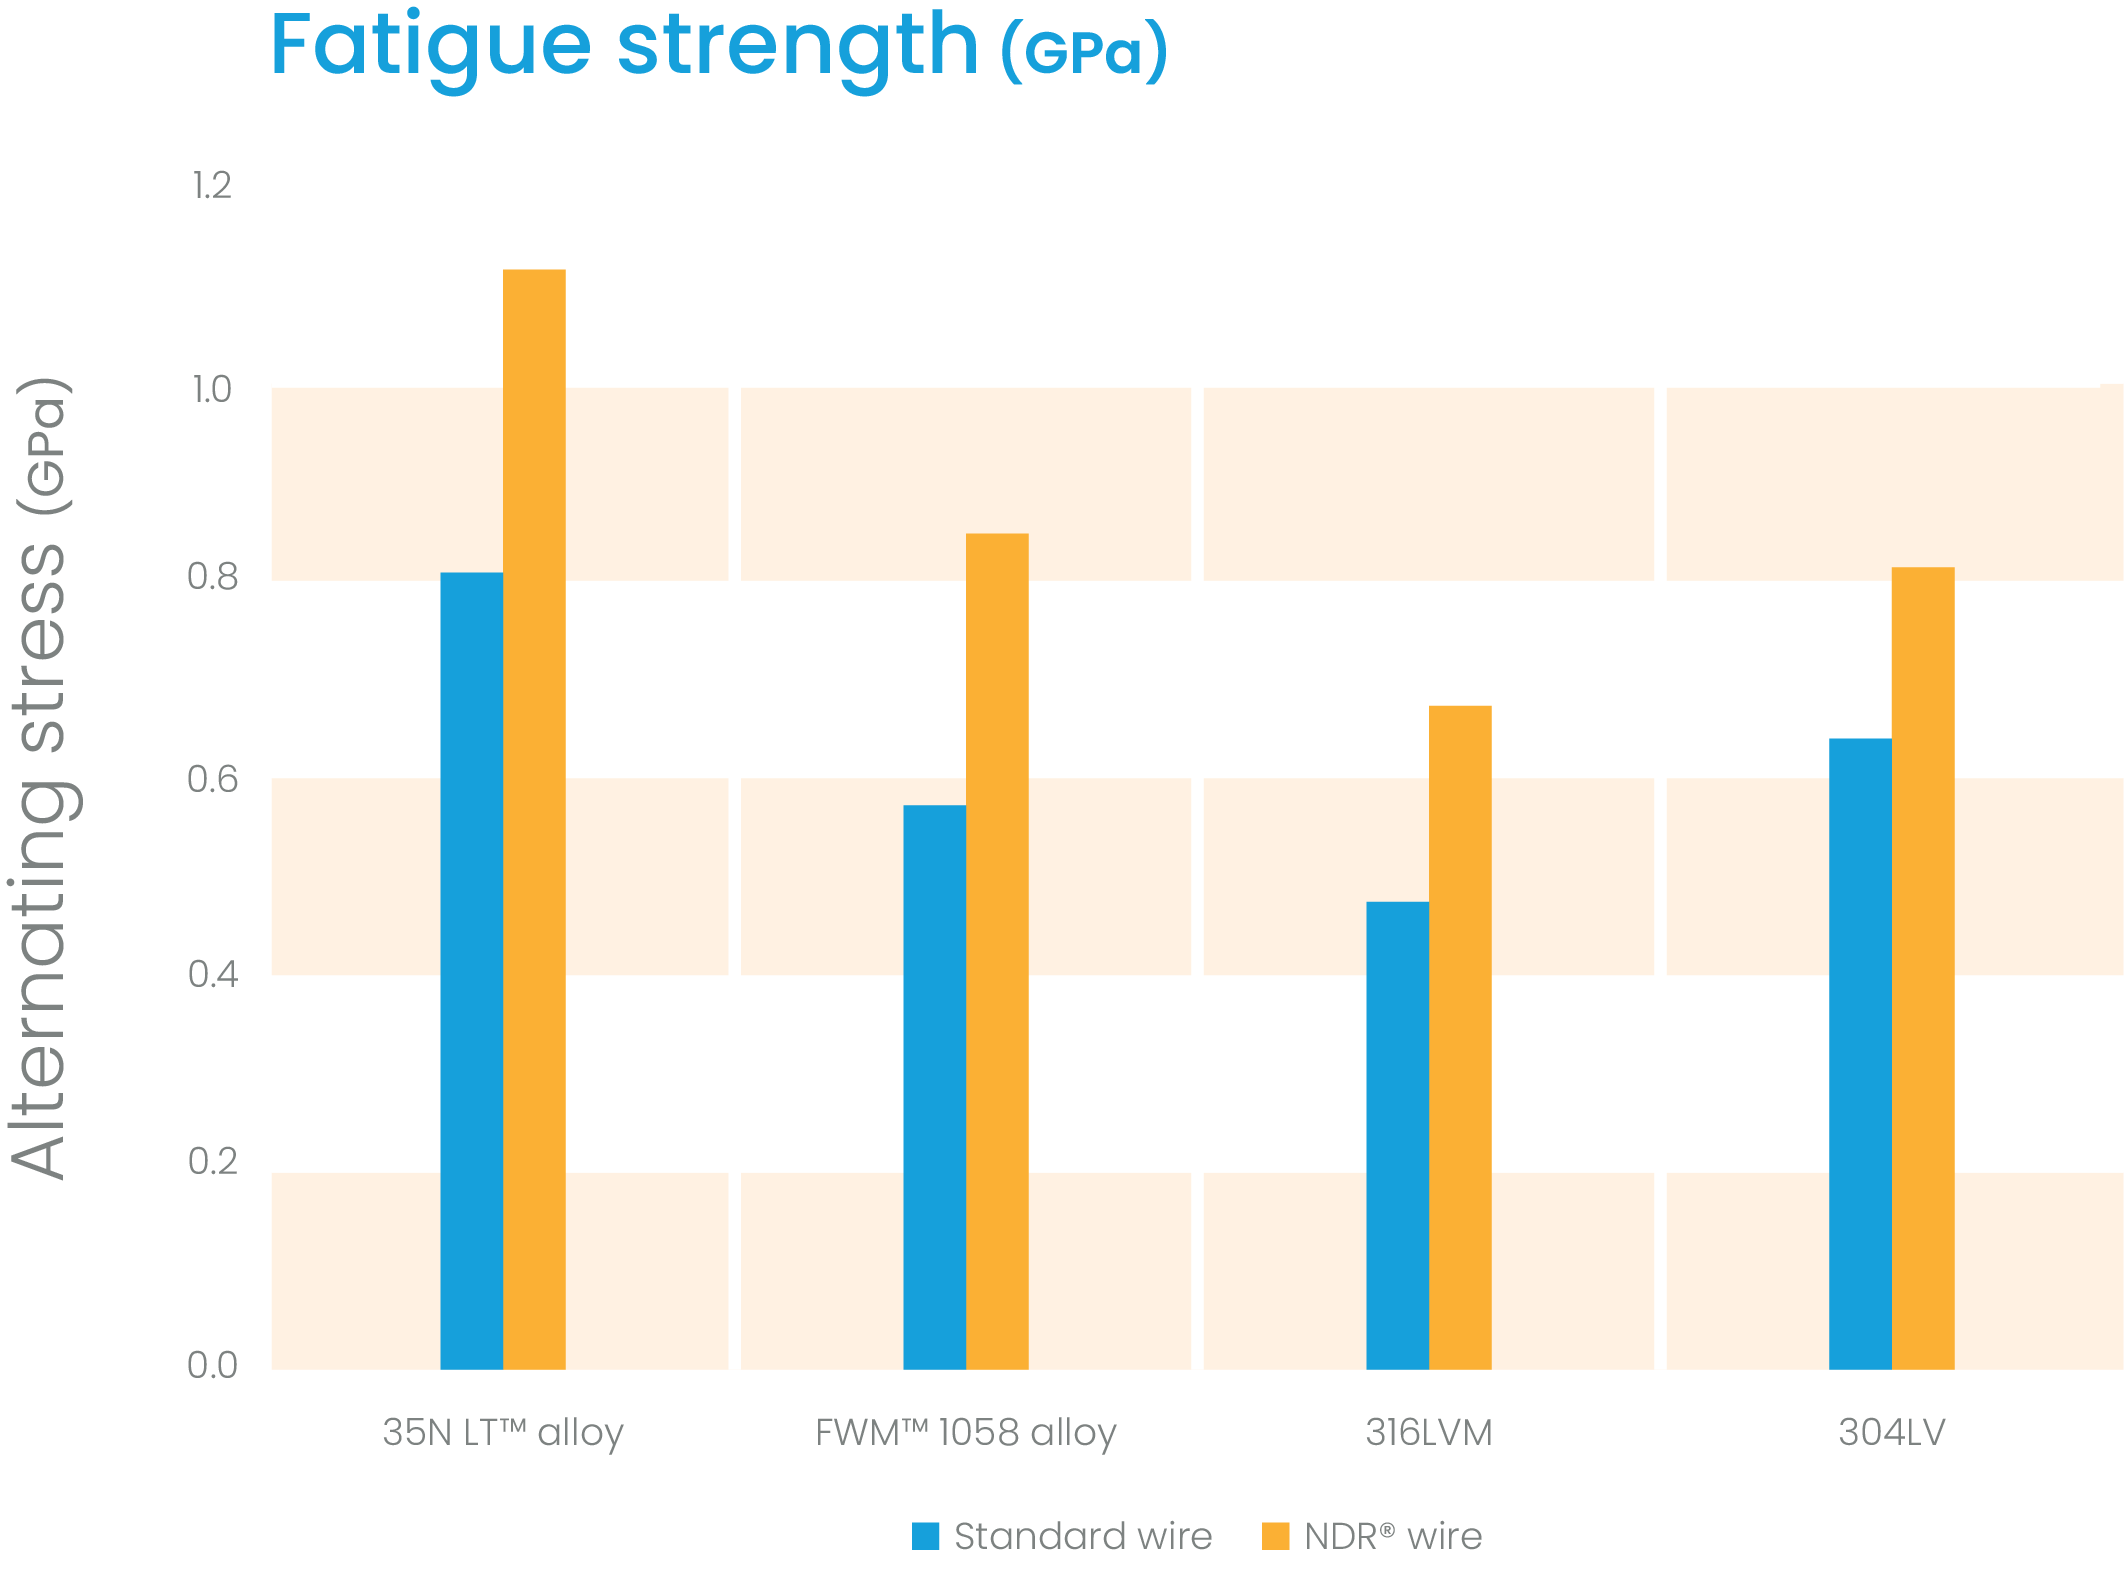 Bar graph comparing fatigue life and microstructure between NDR® wire and various grades of stainless steel alloys